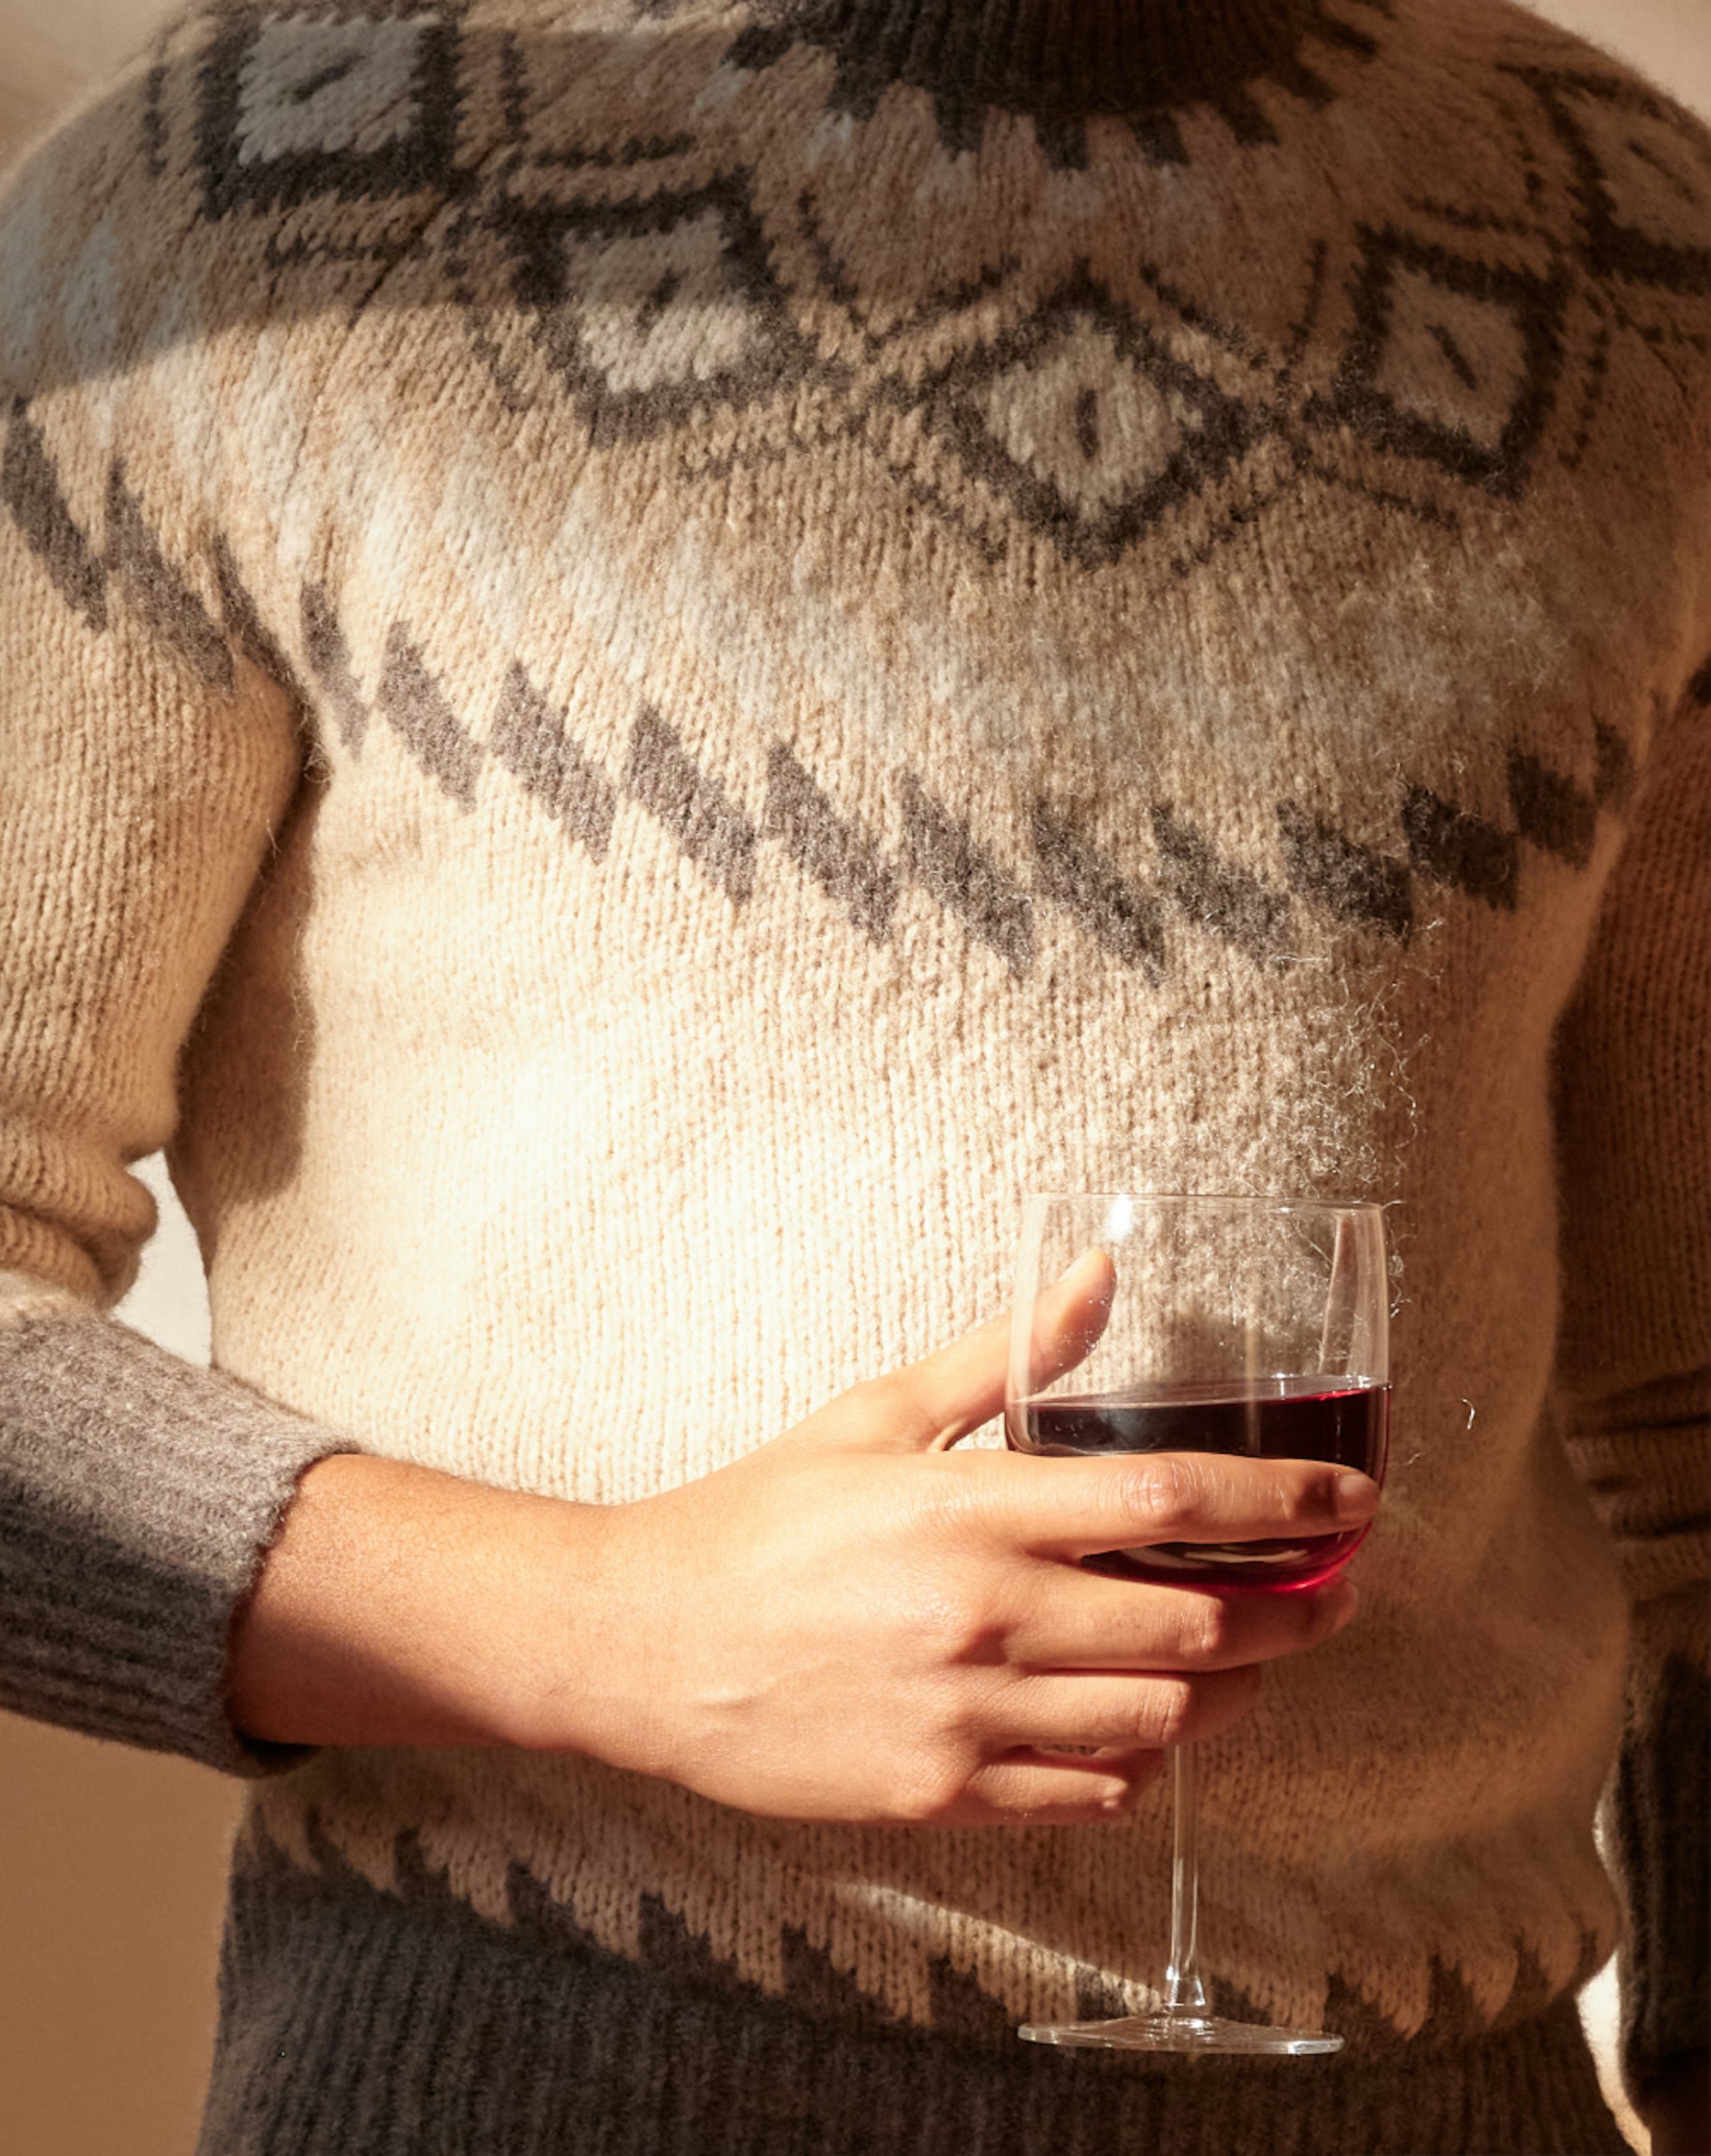 fashionable crew neck sweater at an ugly sweater party